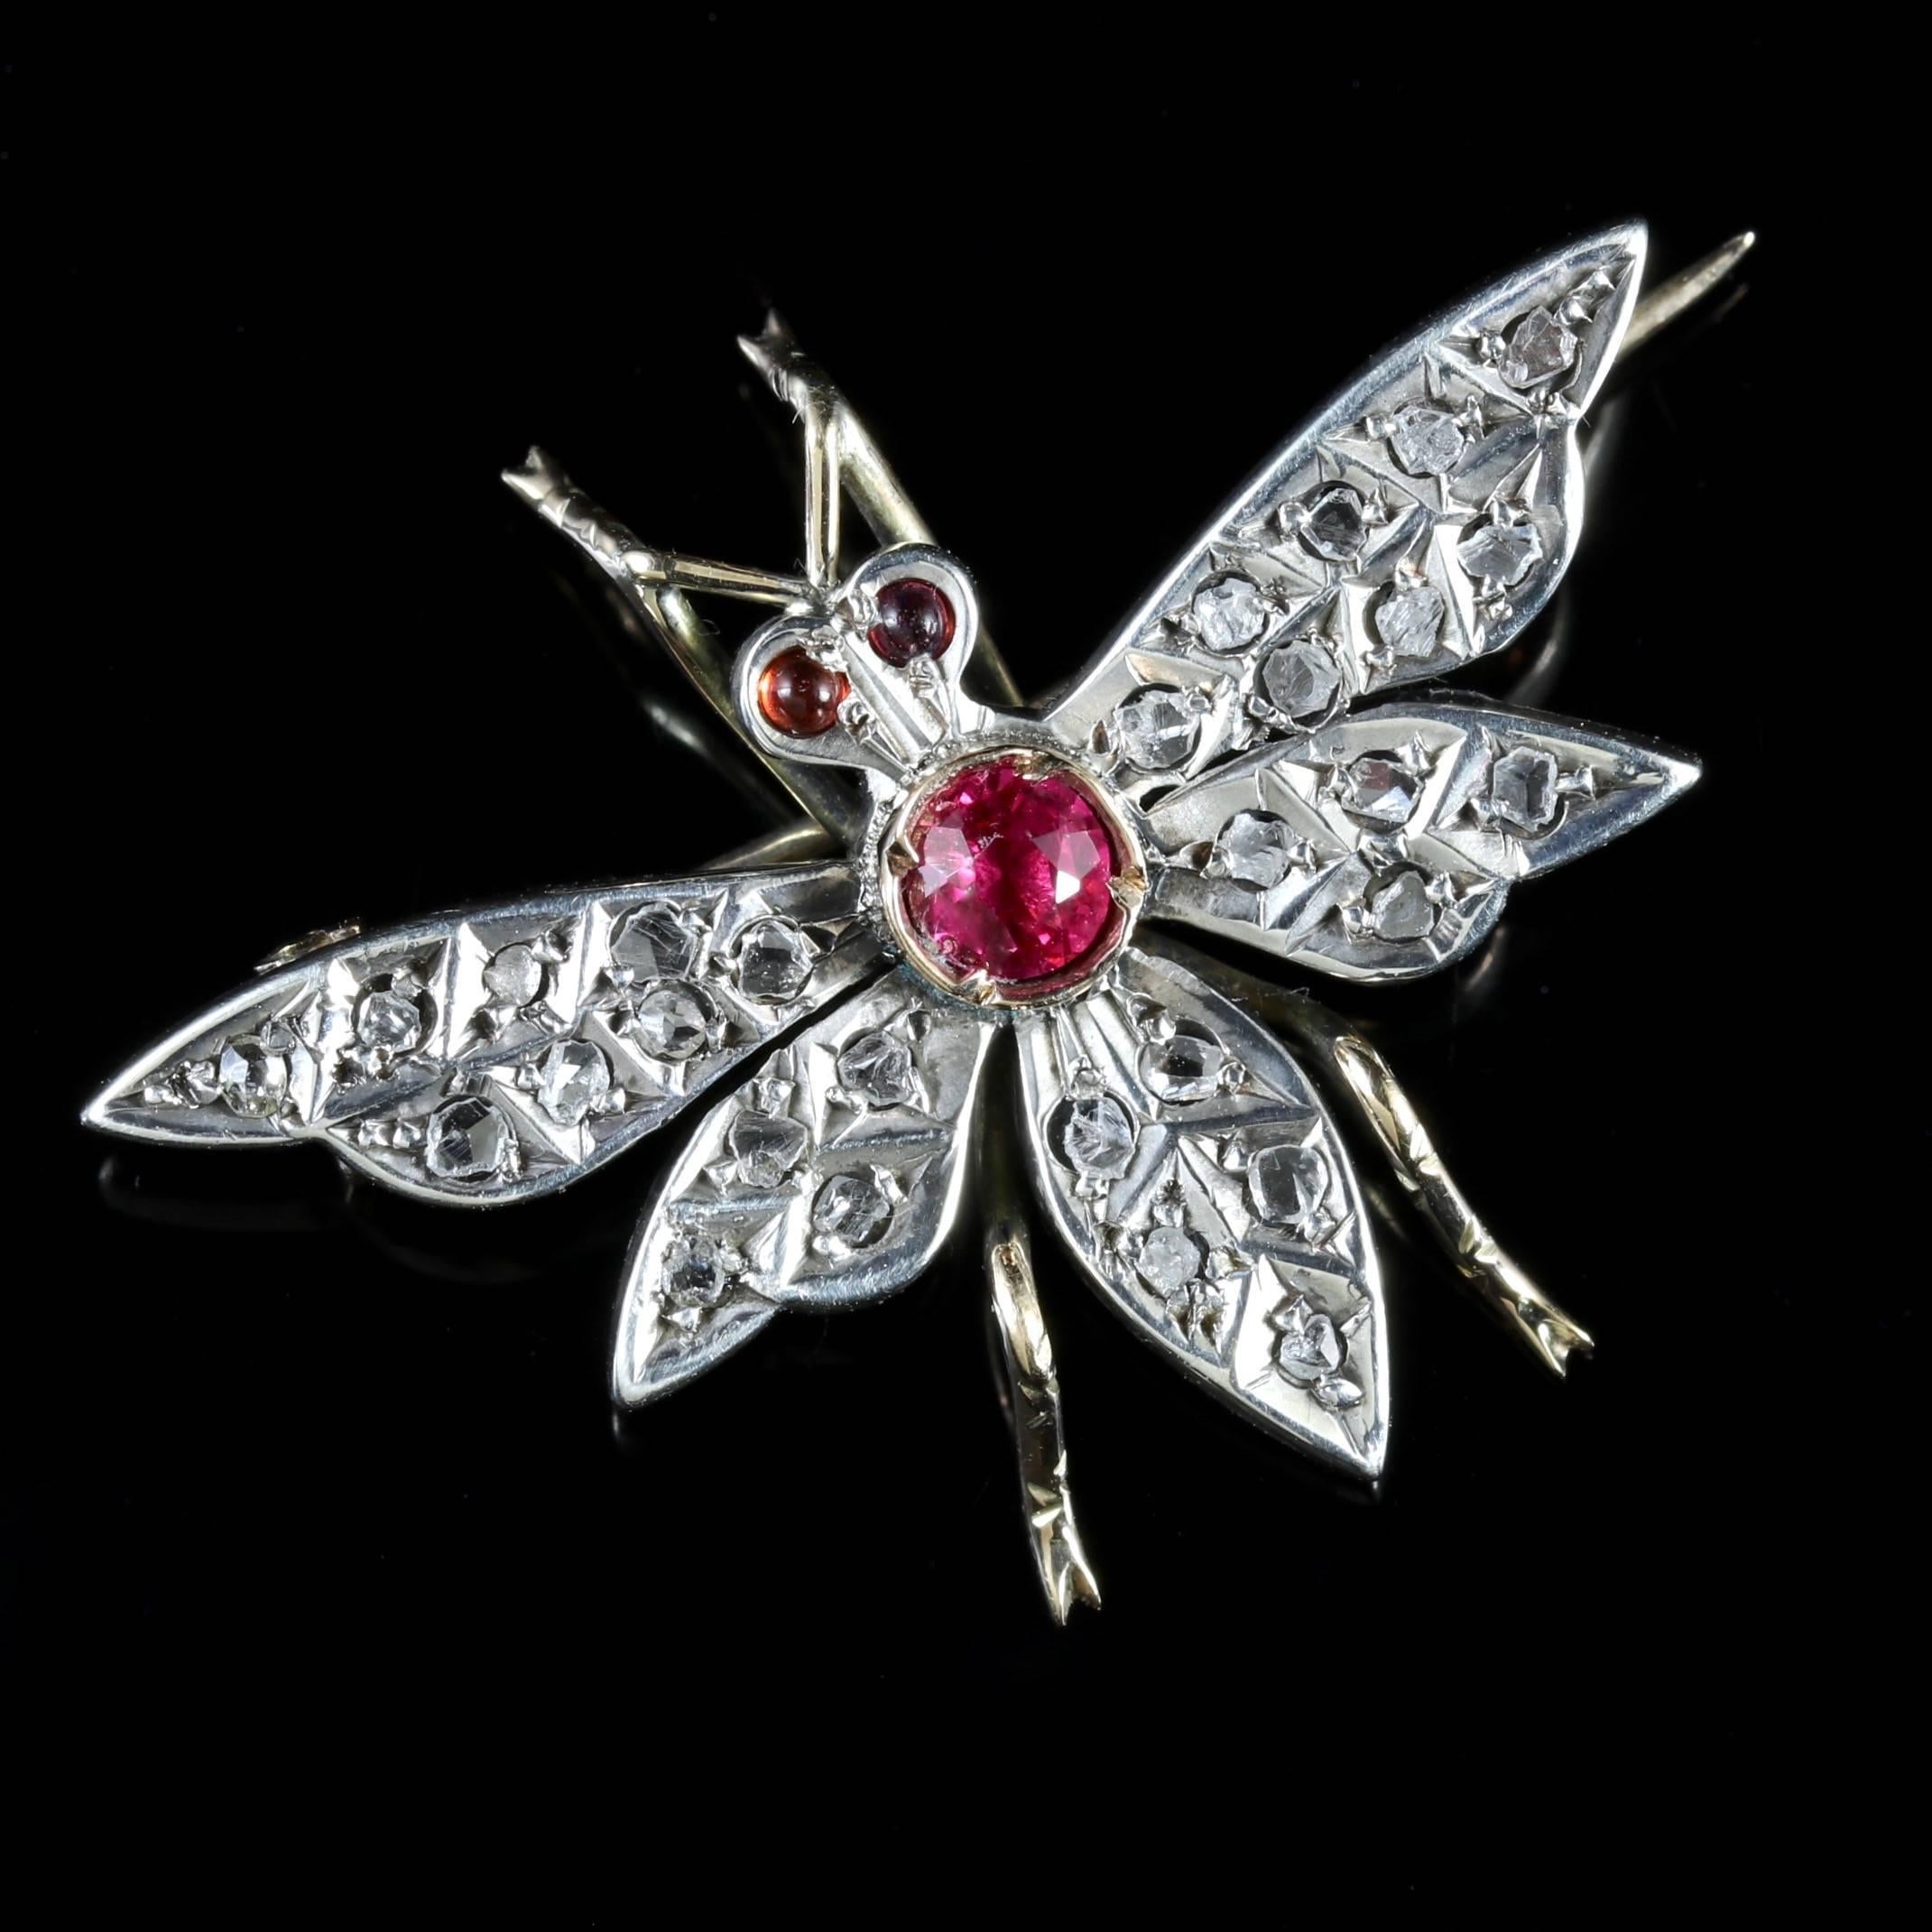 This delightful Victorian 18ct Gold and Silver butterfly brooch is adorned with Rubies and sparkling rose cut Diamonds, Circa 1900.

Butterfly or insect jewellery is highly collectable and was a symbol of good luck to the wearer during the Victorian